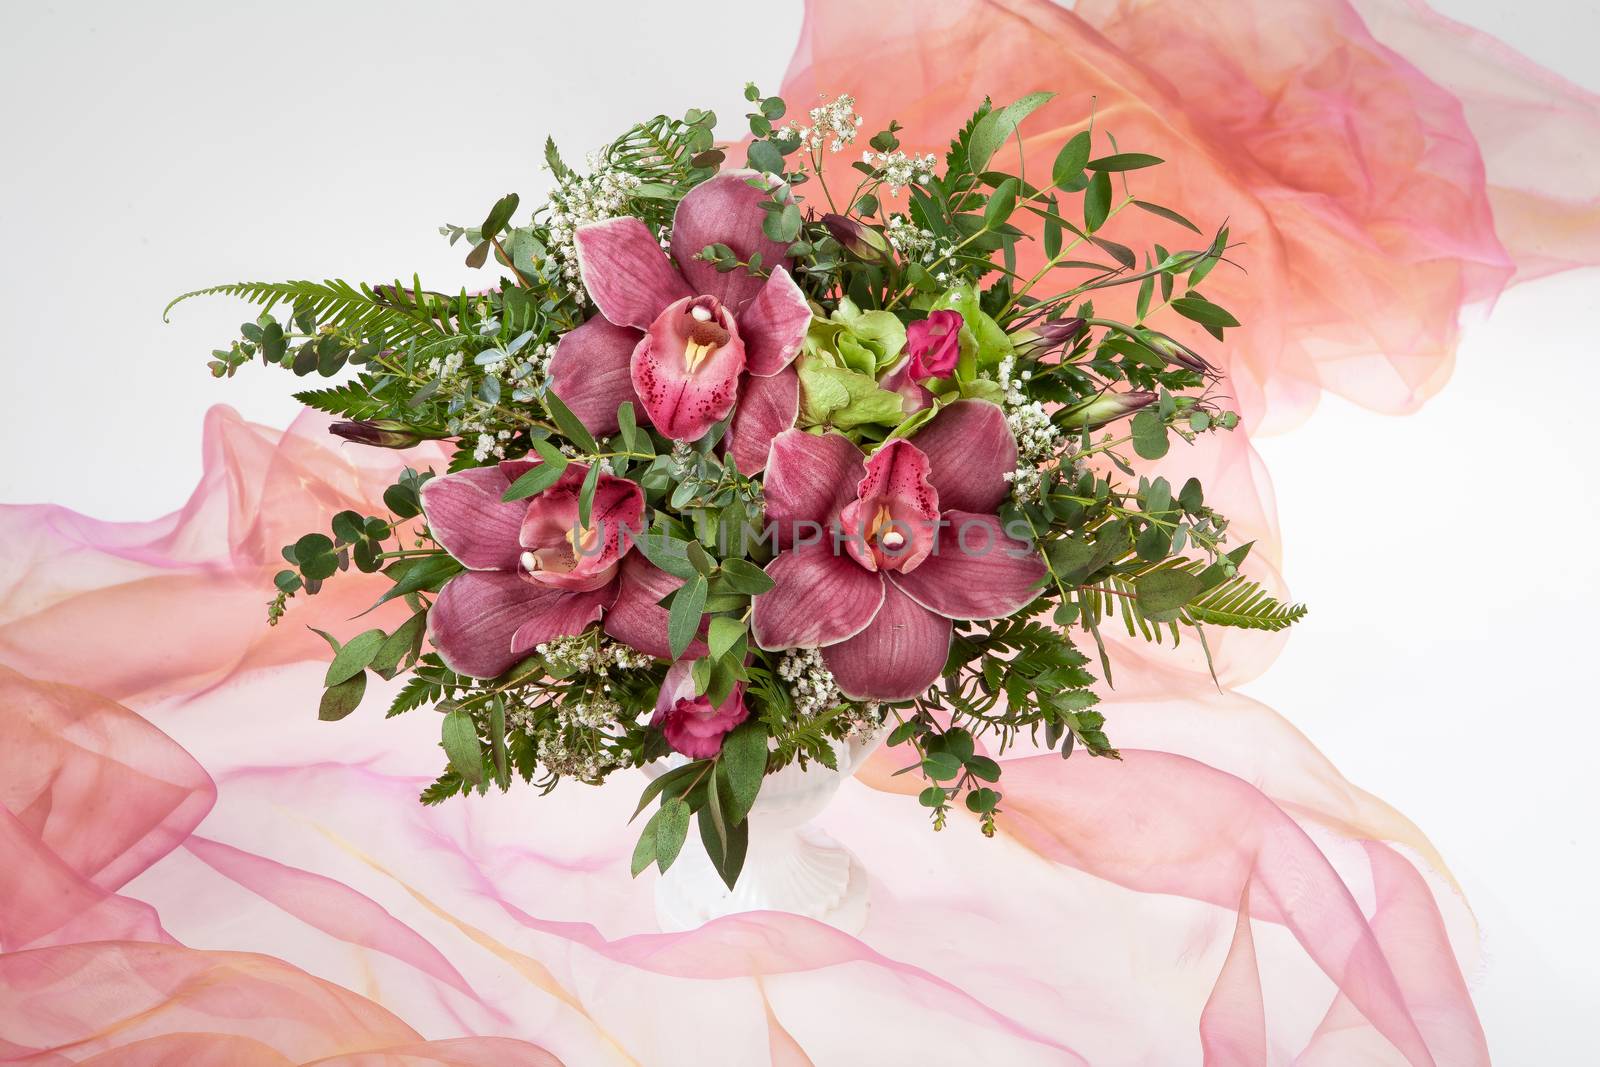 Bouquet of flowers on a fabric studio background